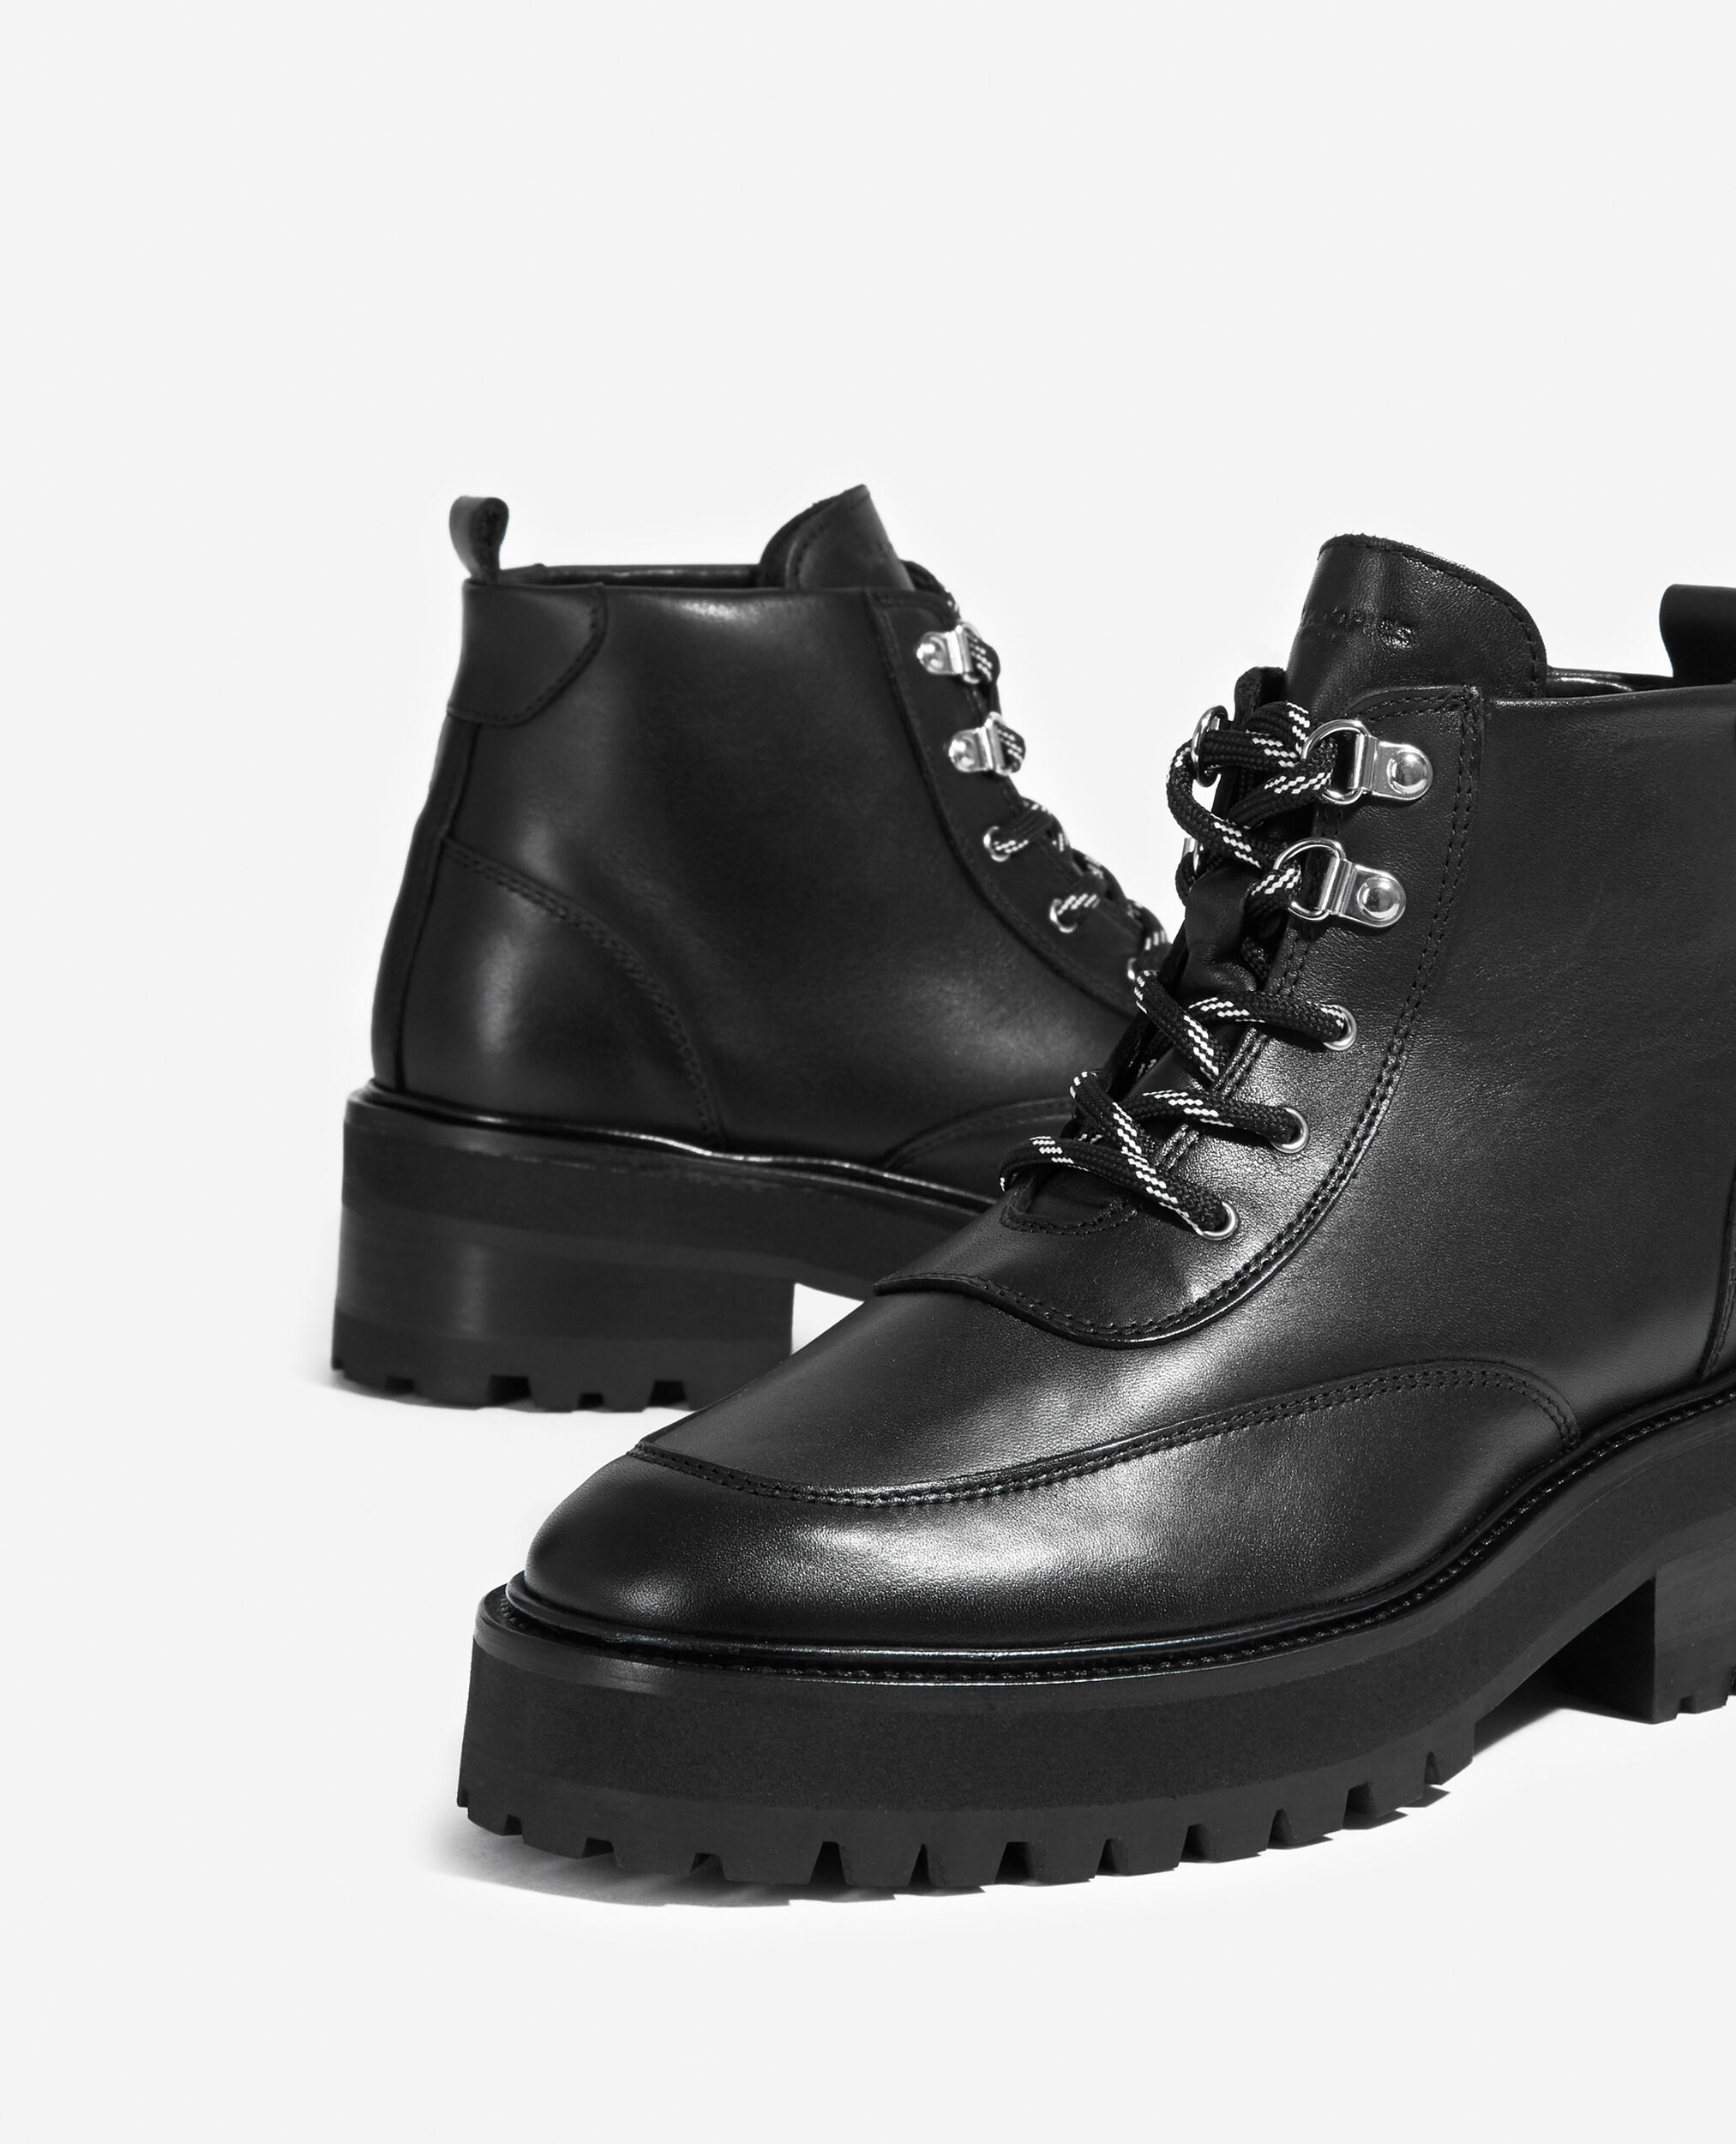 Flat black leather boots in ranger style, BLACK, hi-res image number null